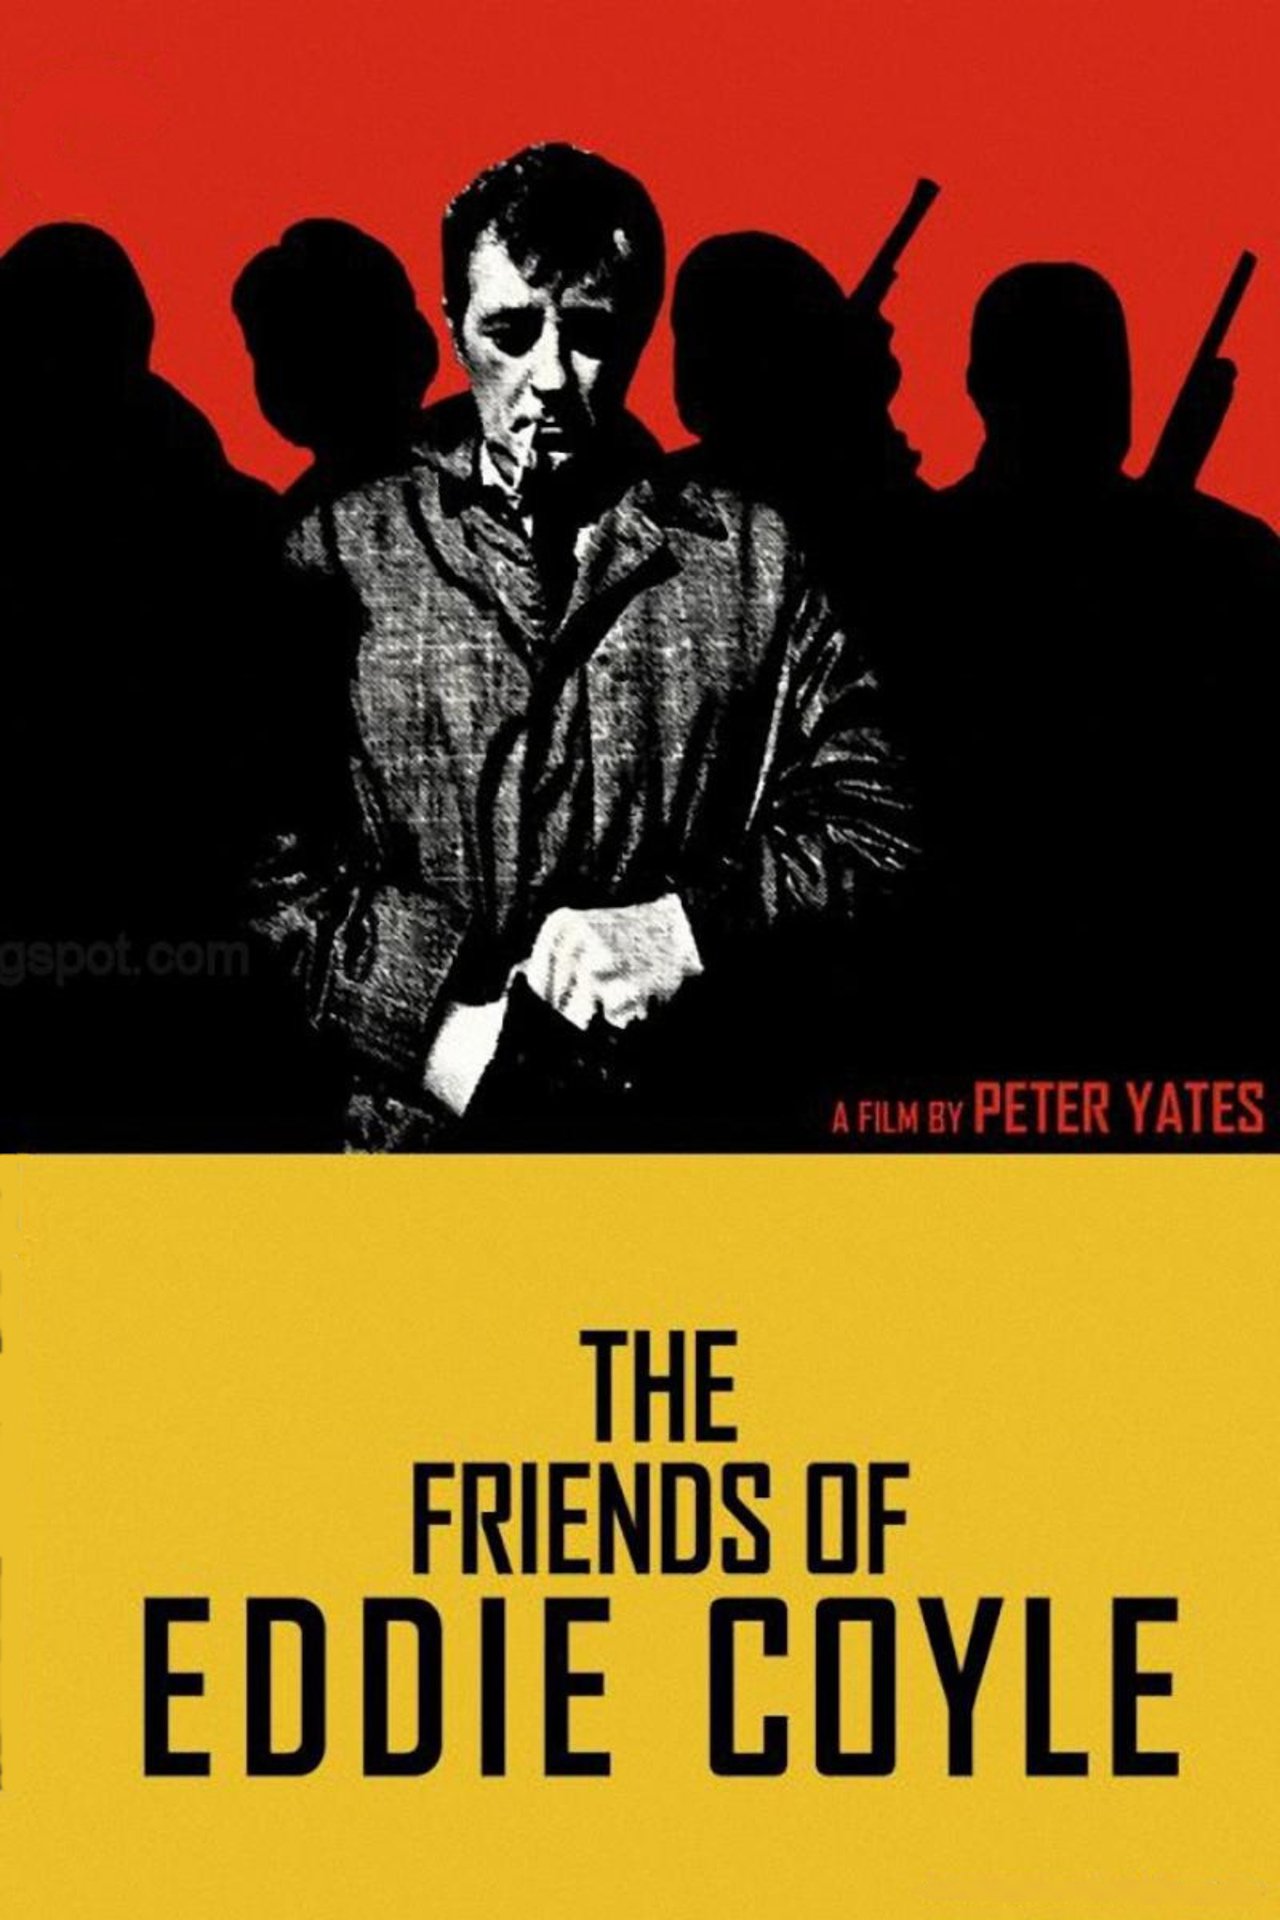 Aero Theatre Presents: Double Feature New DCP! The Friends of Eddie Coyle and The Yakuza